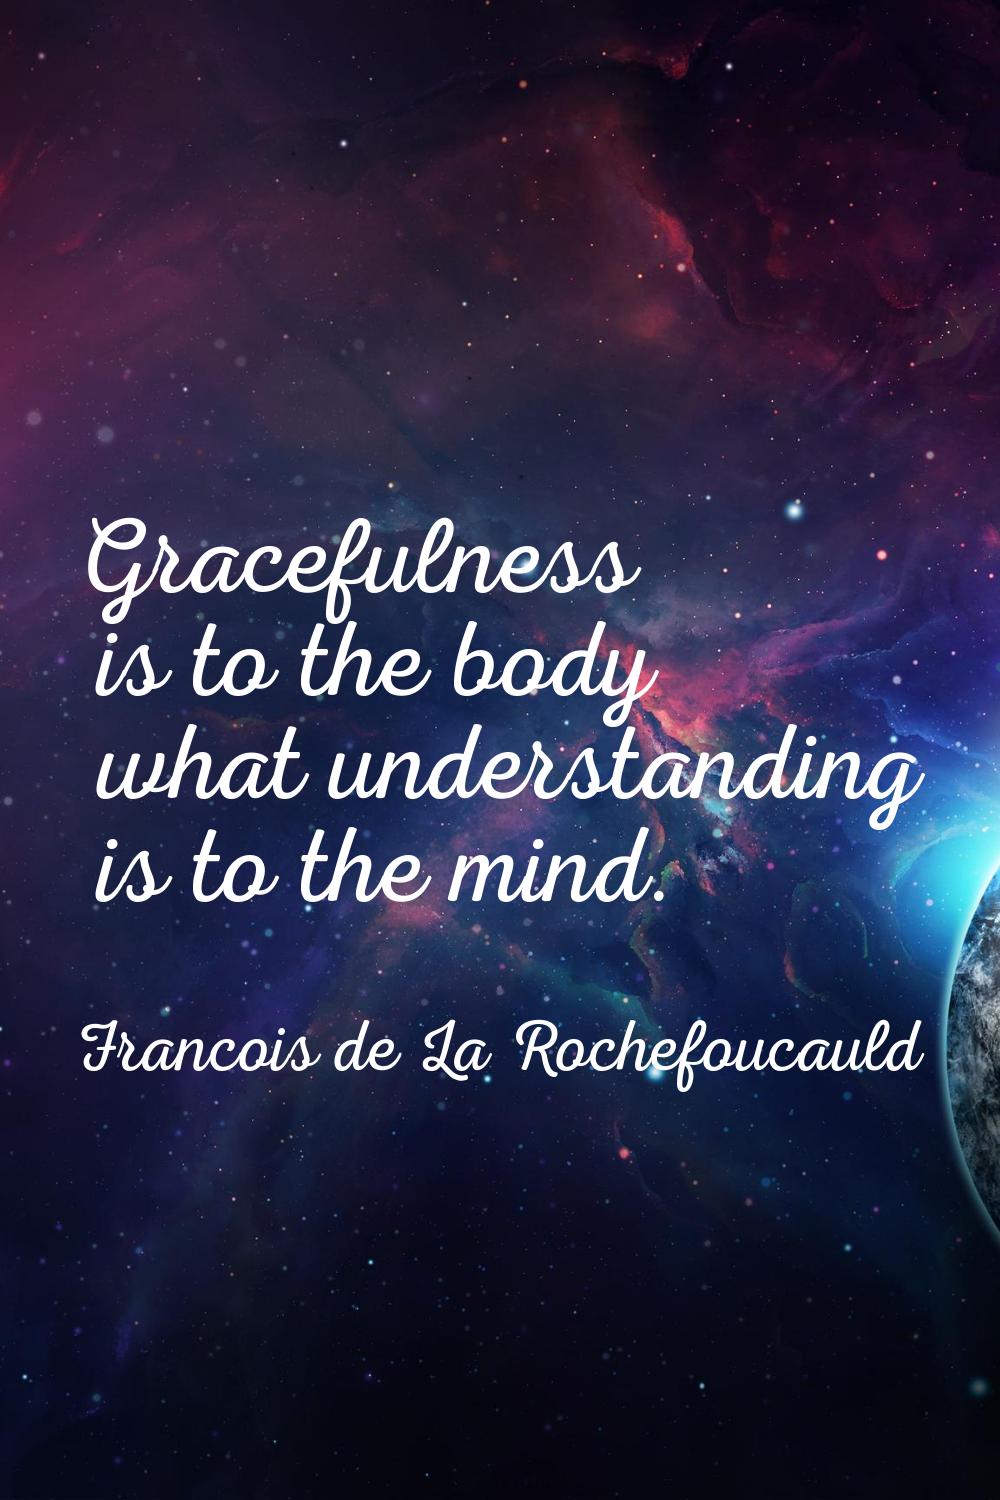 Gracefulness is to the body what understanding is to the mind.